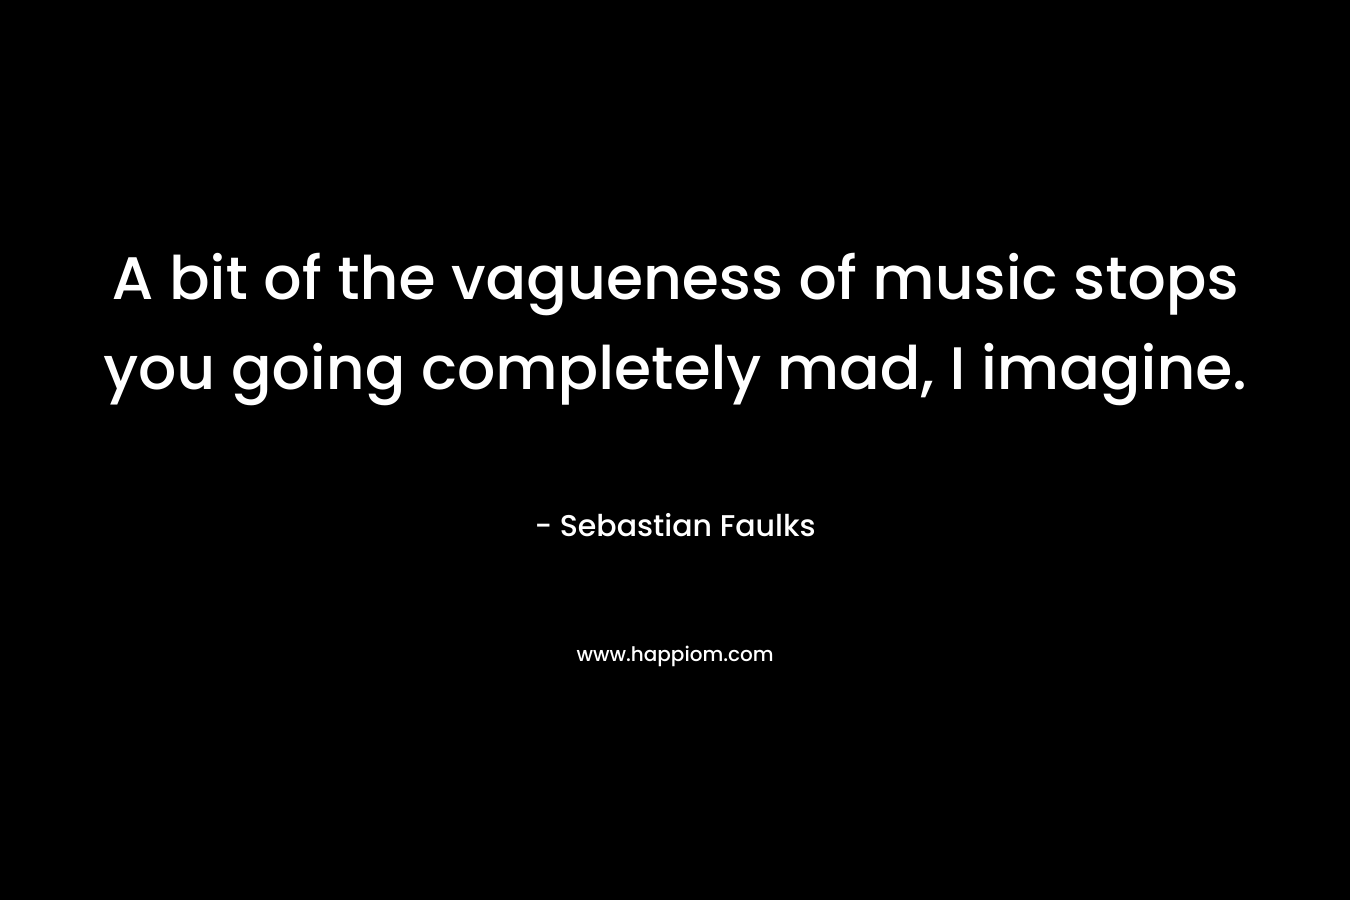 A bit of the vagueness of music stops you going completely mad, I imagine. – Sebastian Faulks